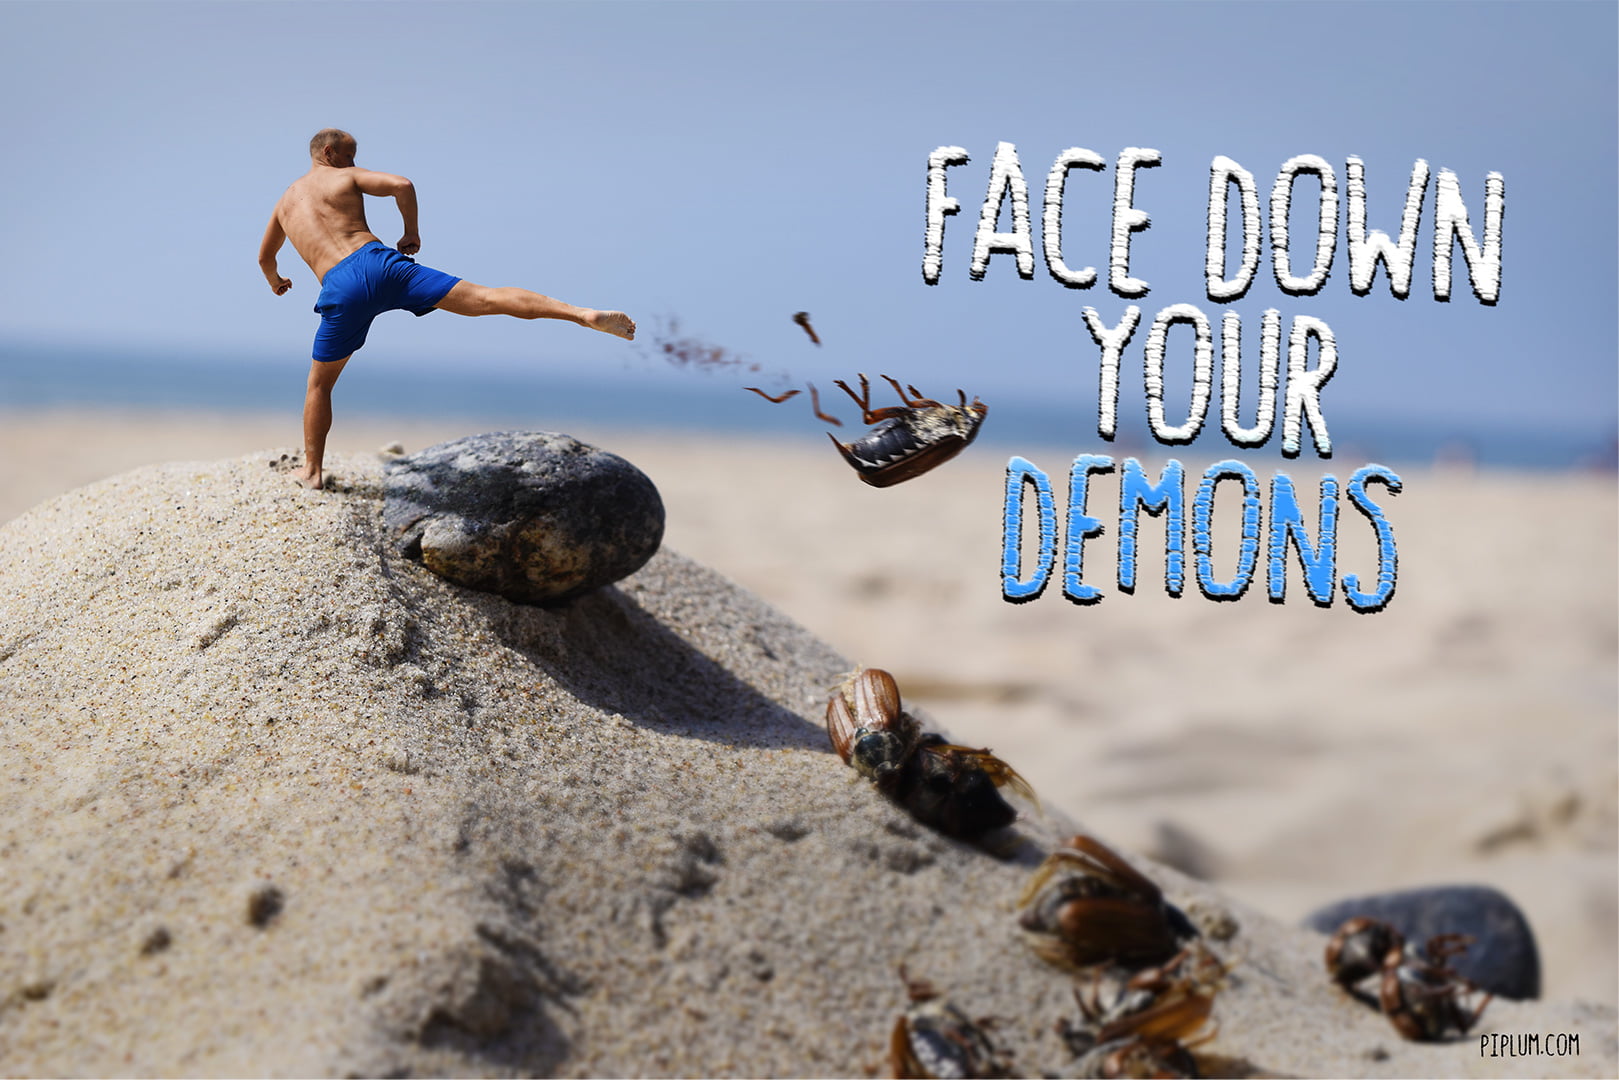 Motivational-Quote-Man-fighting-bugs-in-the-beach-surreal-photo-manipulation-photoshop-funny-art